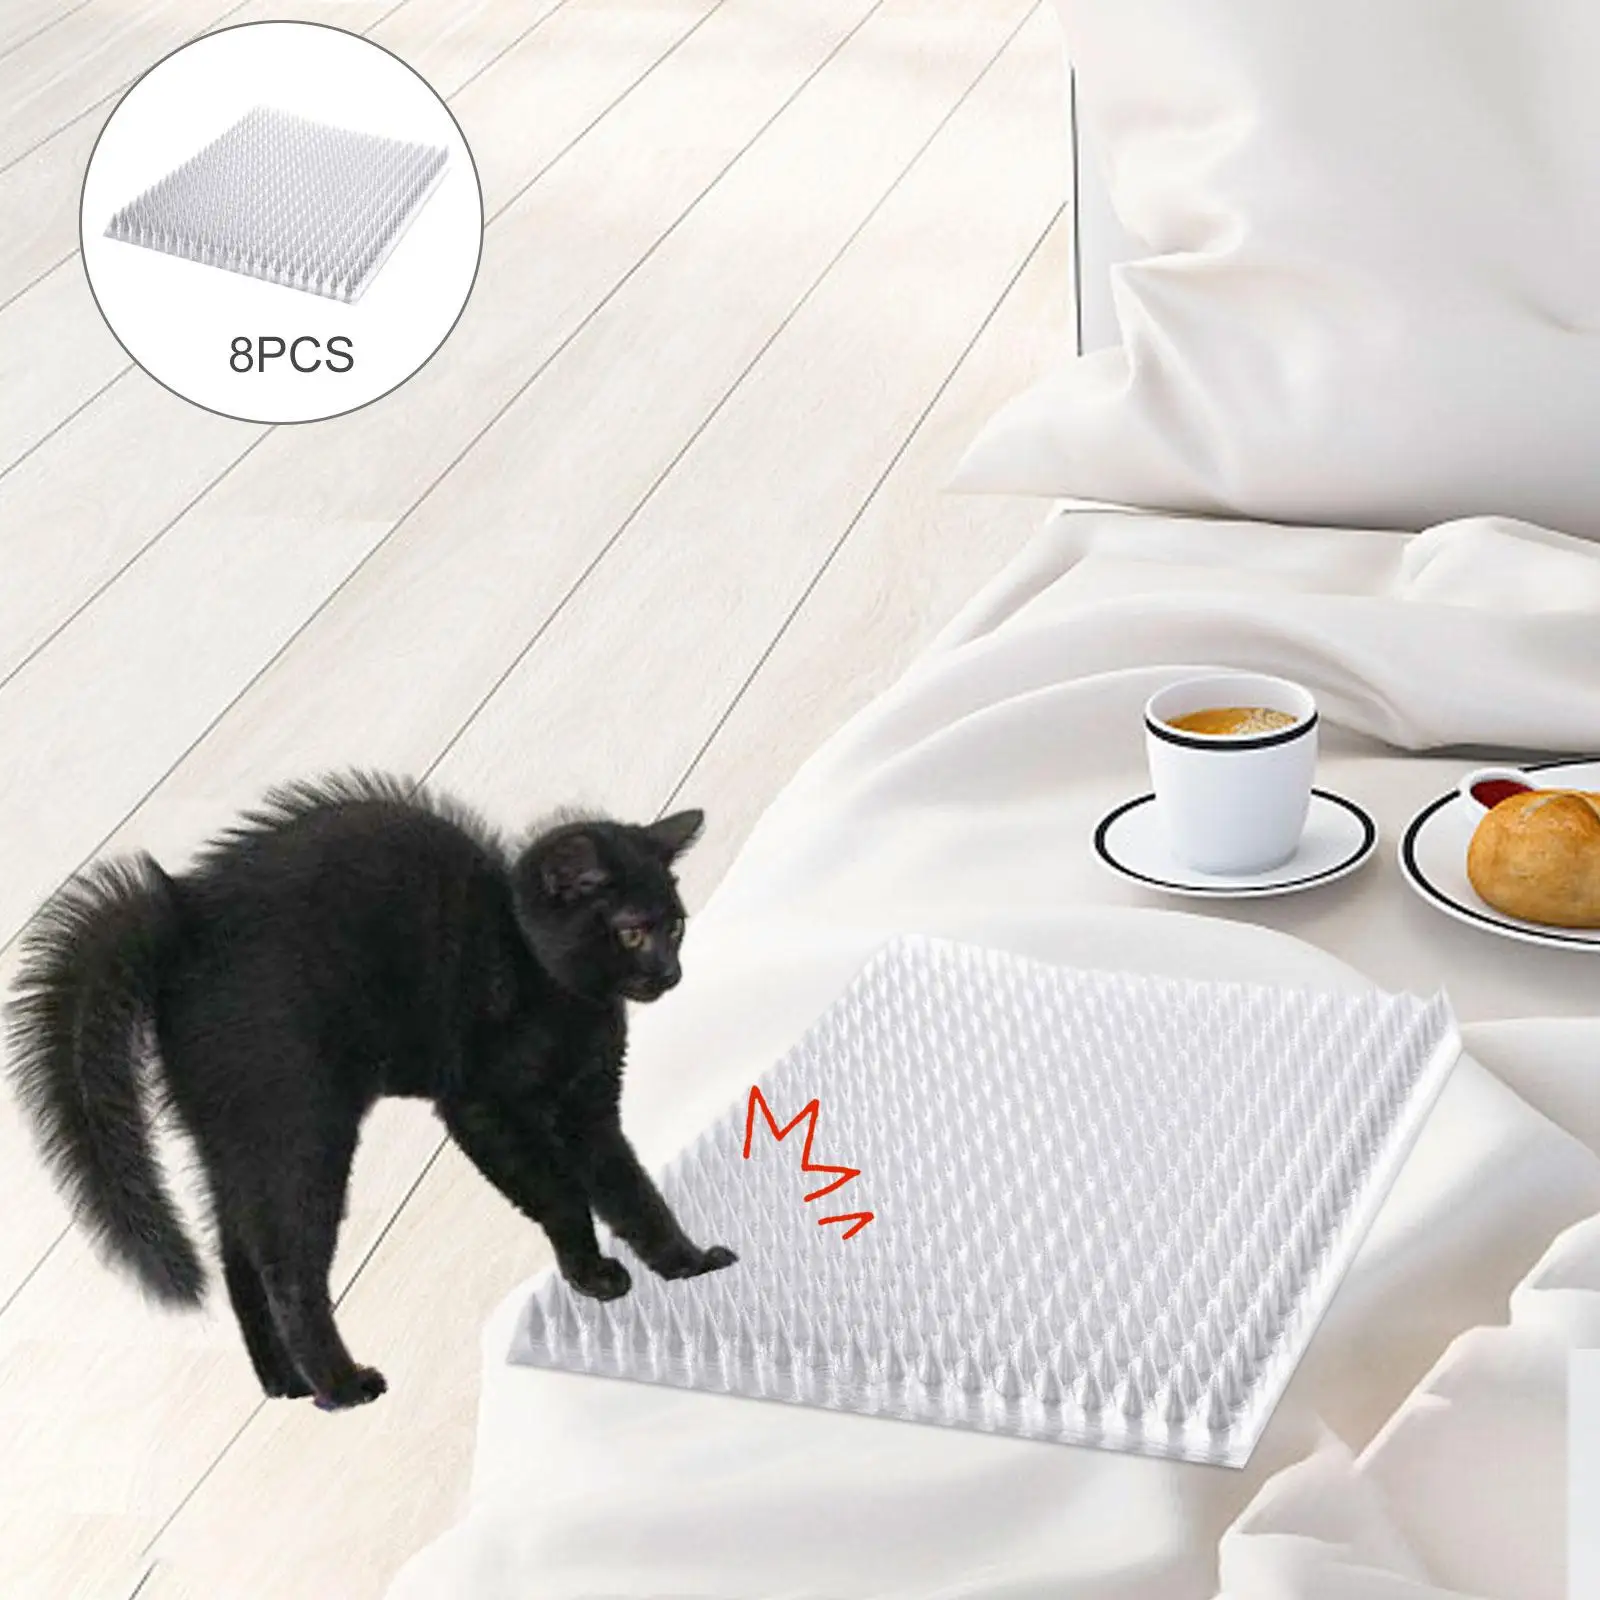 8pcs Outdoor Cat  Pad Prickle Strips  Deterrent Window Sofa Bed   people Digging Stopper